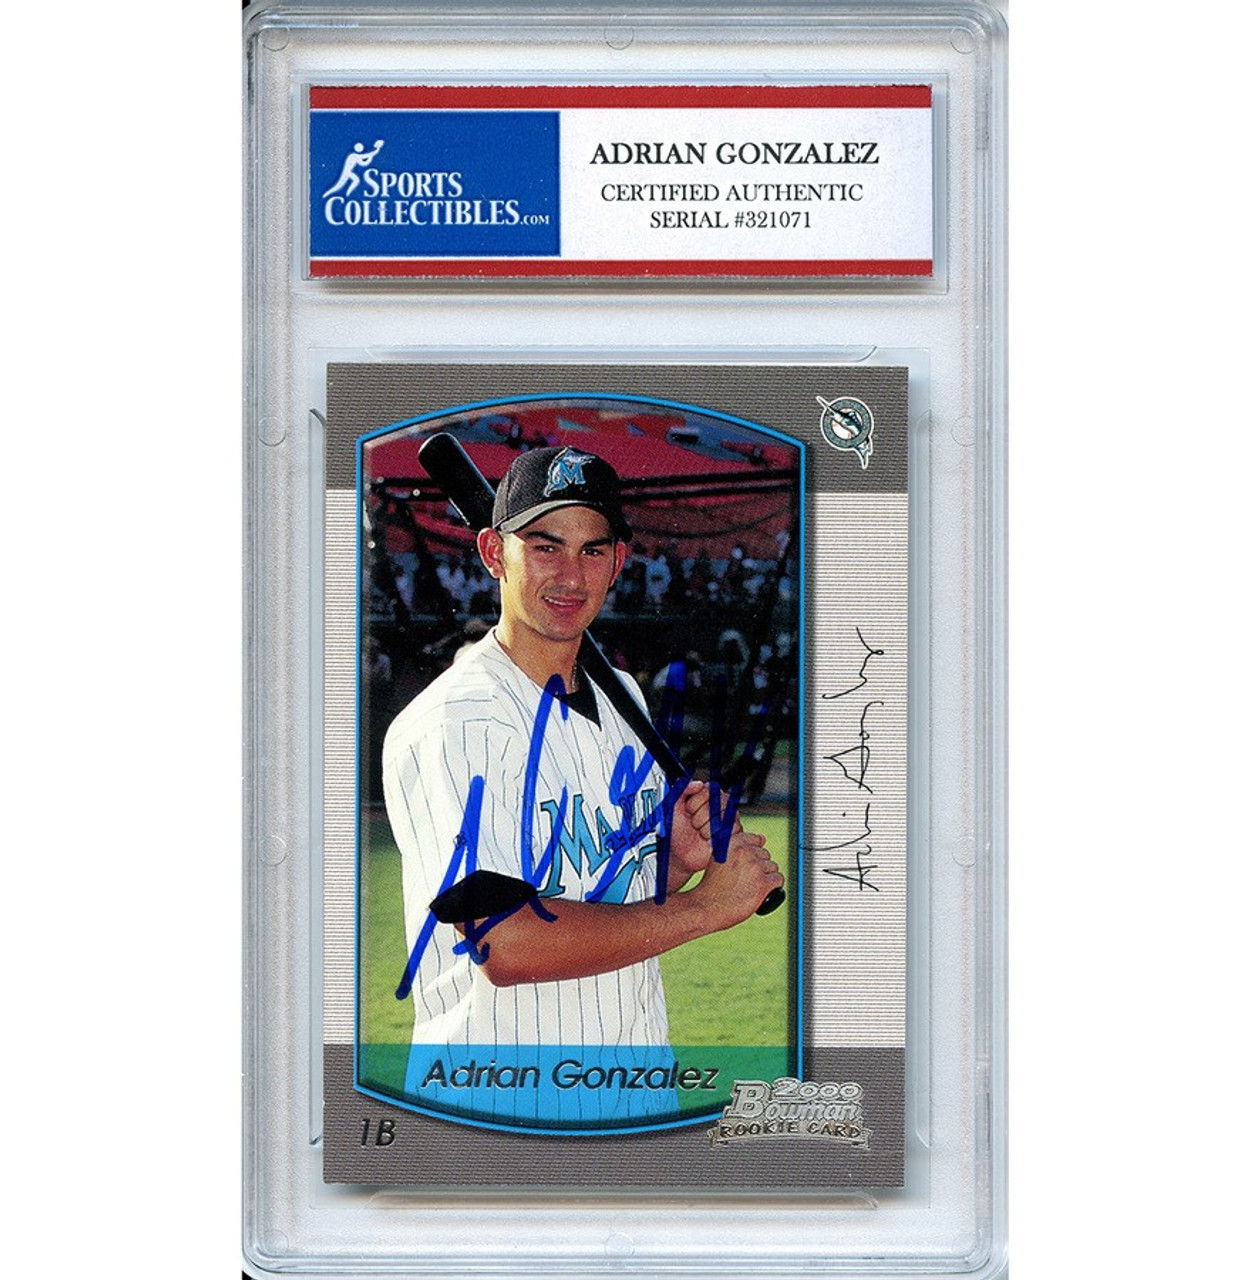 2000 TOPPS ADRIAN GONZALEZ RC CERTIFIED AUTOGRAPH ISSUE BASEBALL CARD